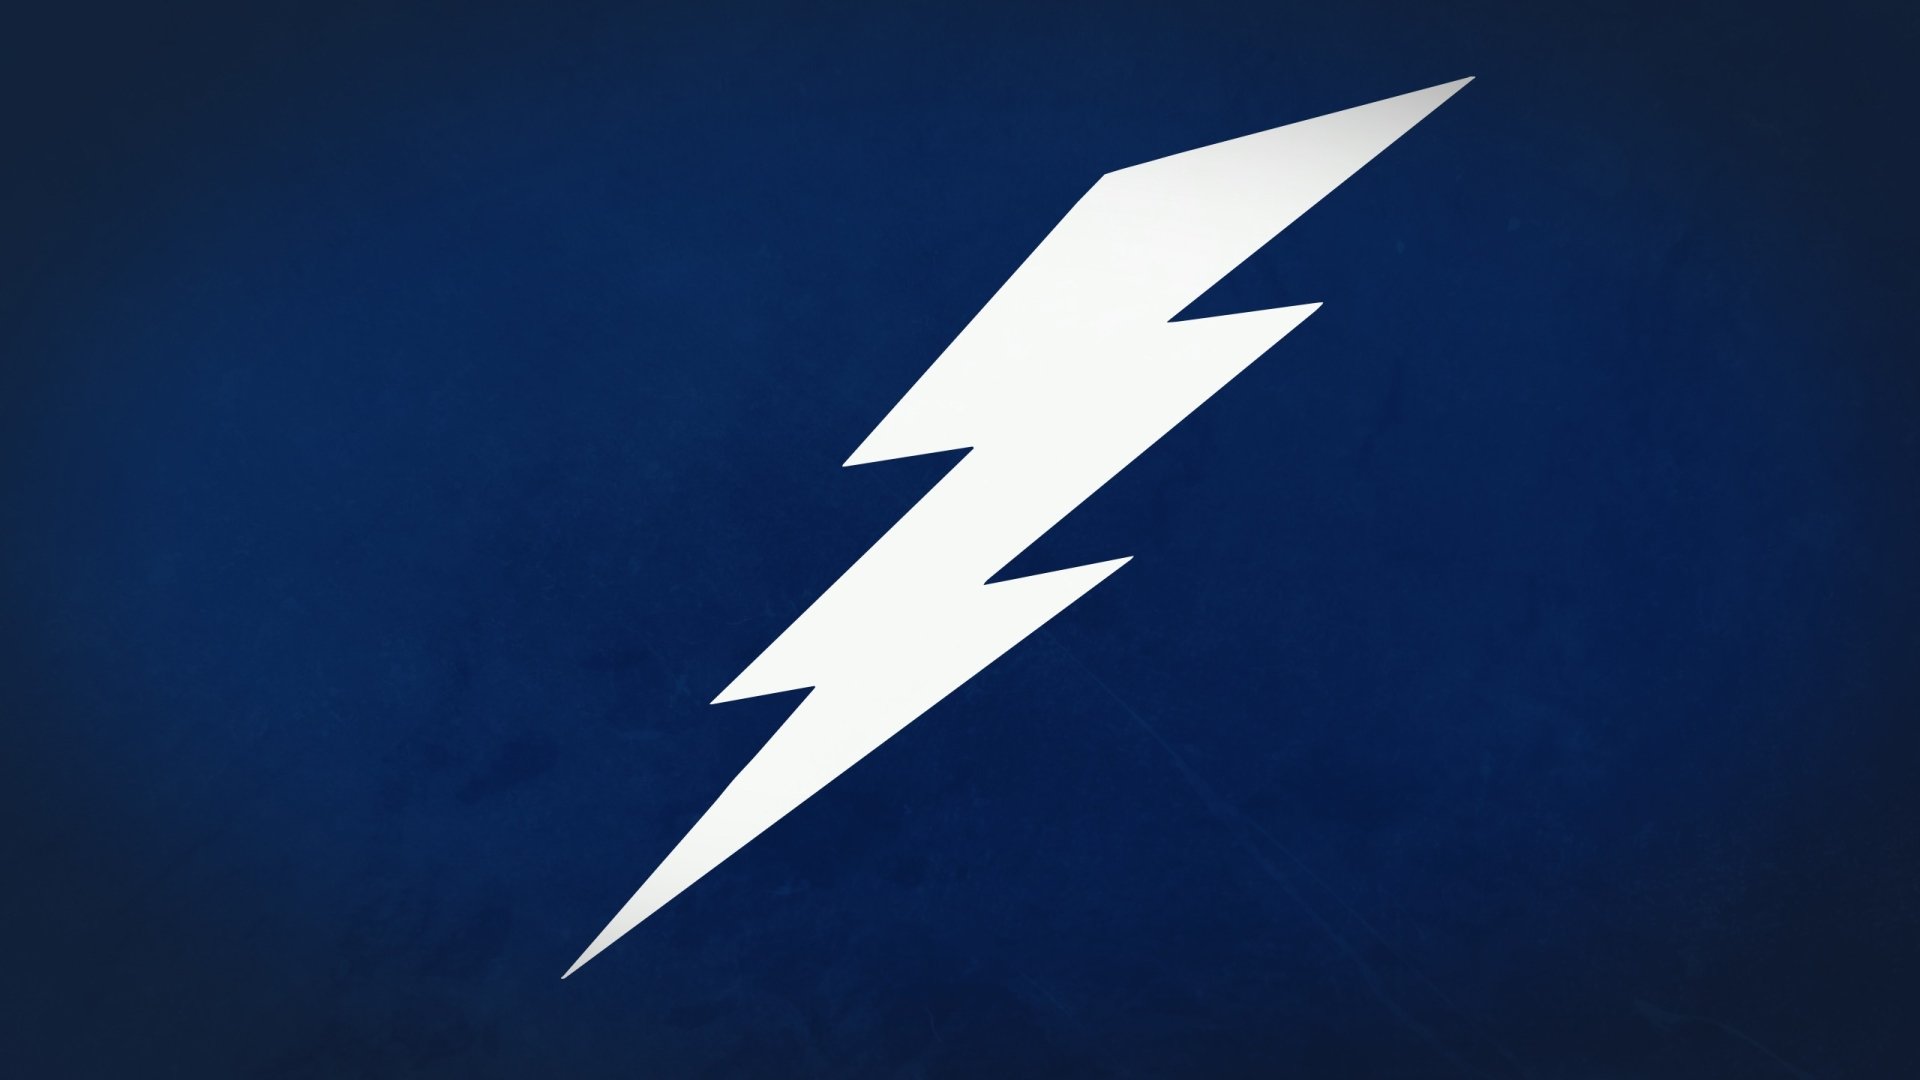 Lightning Iphone Hd Wallpapers